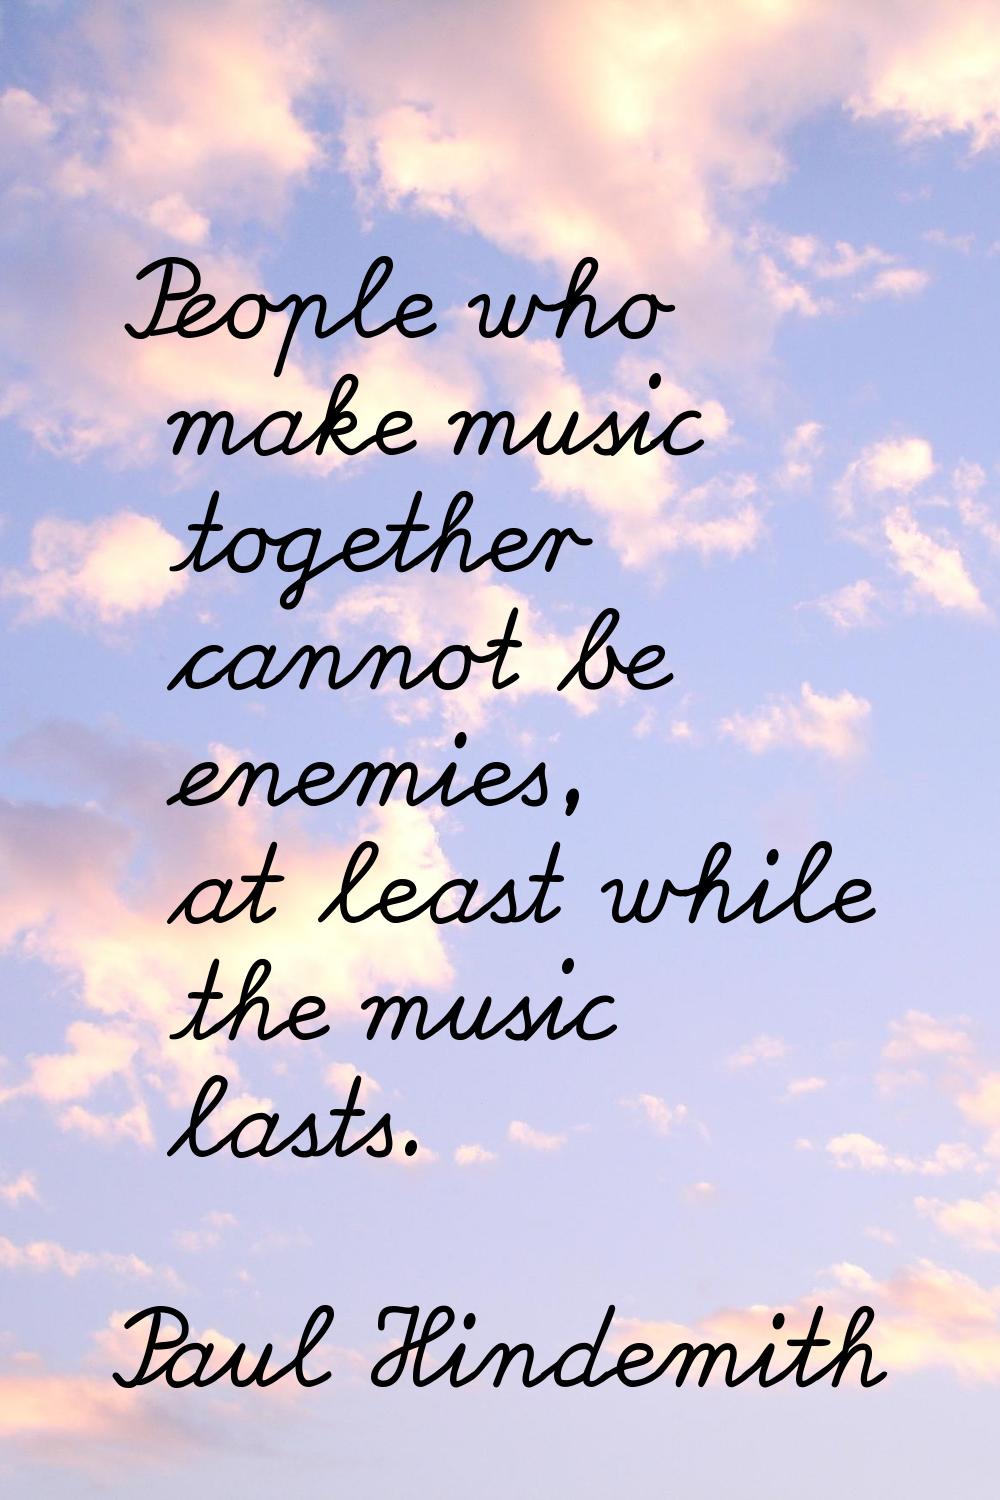 People who make music together cannot be enemies, at least while the music lasts.